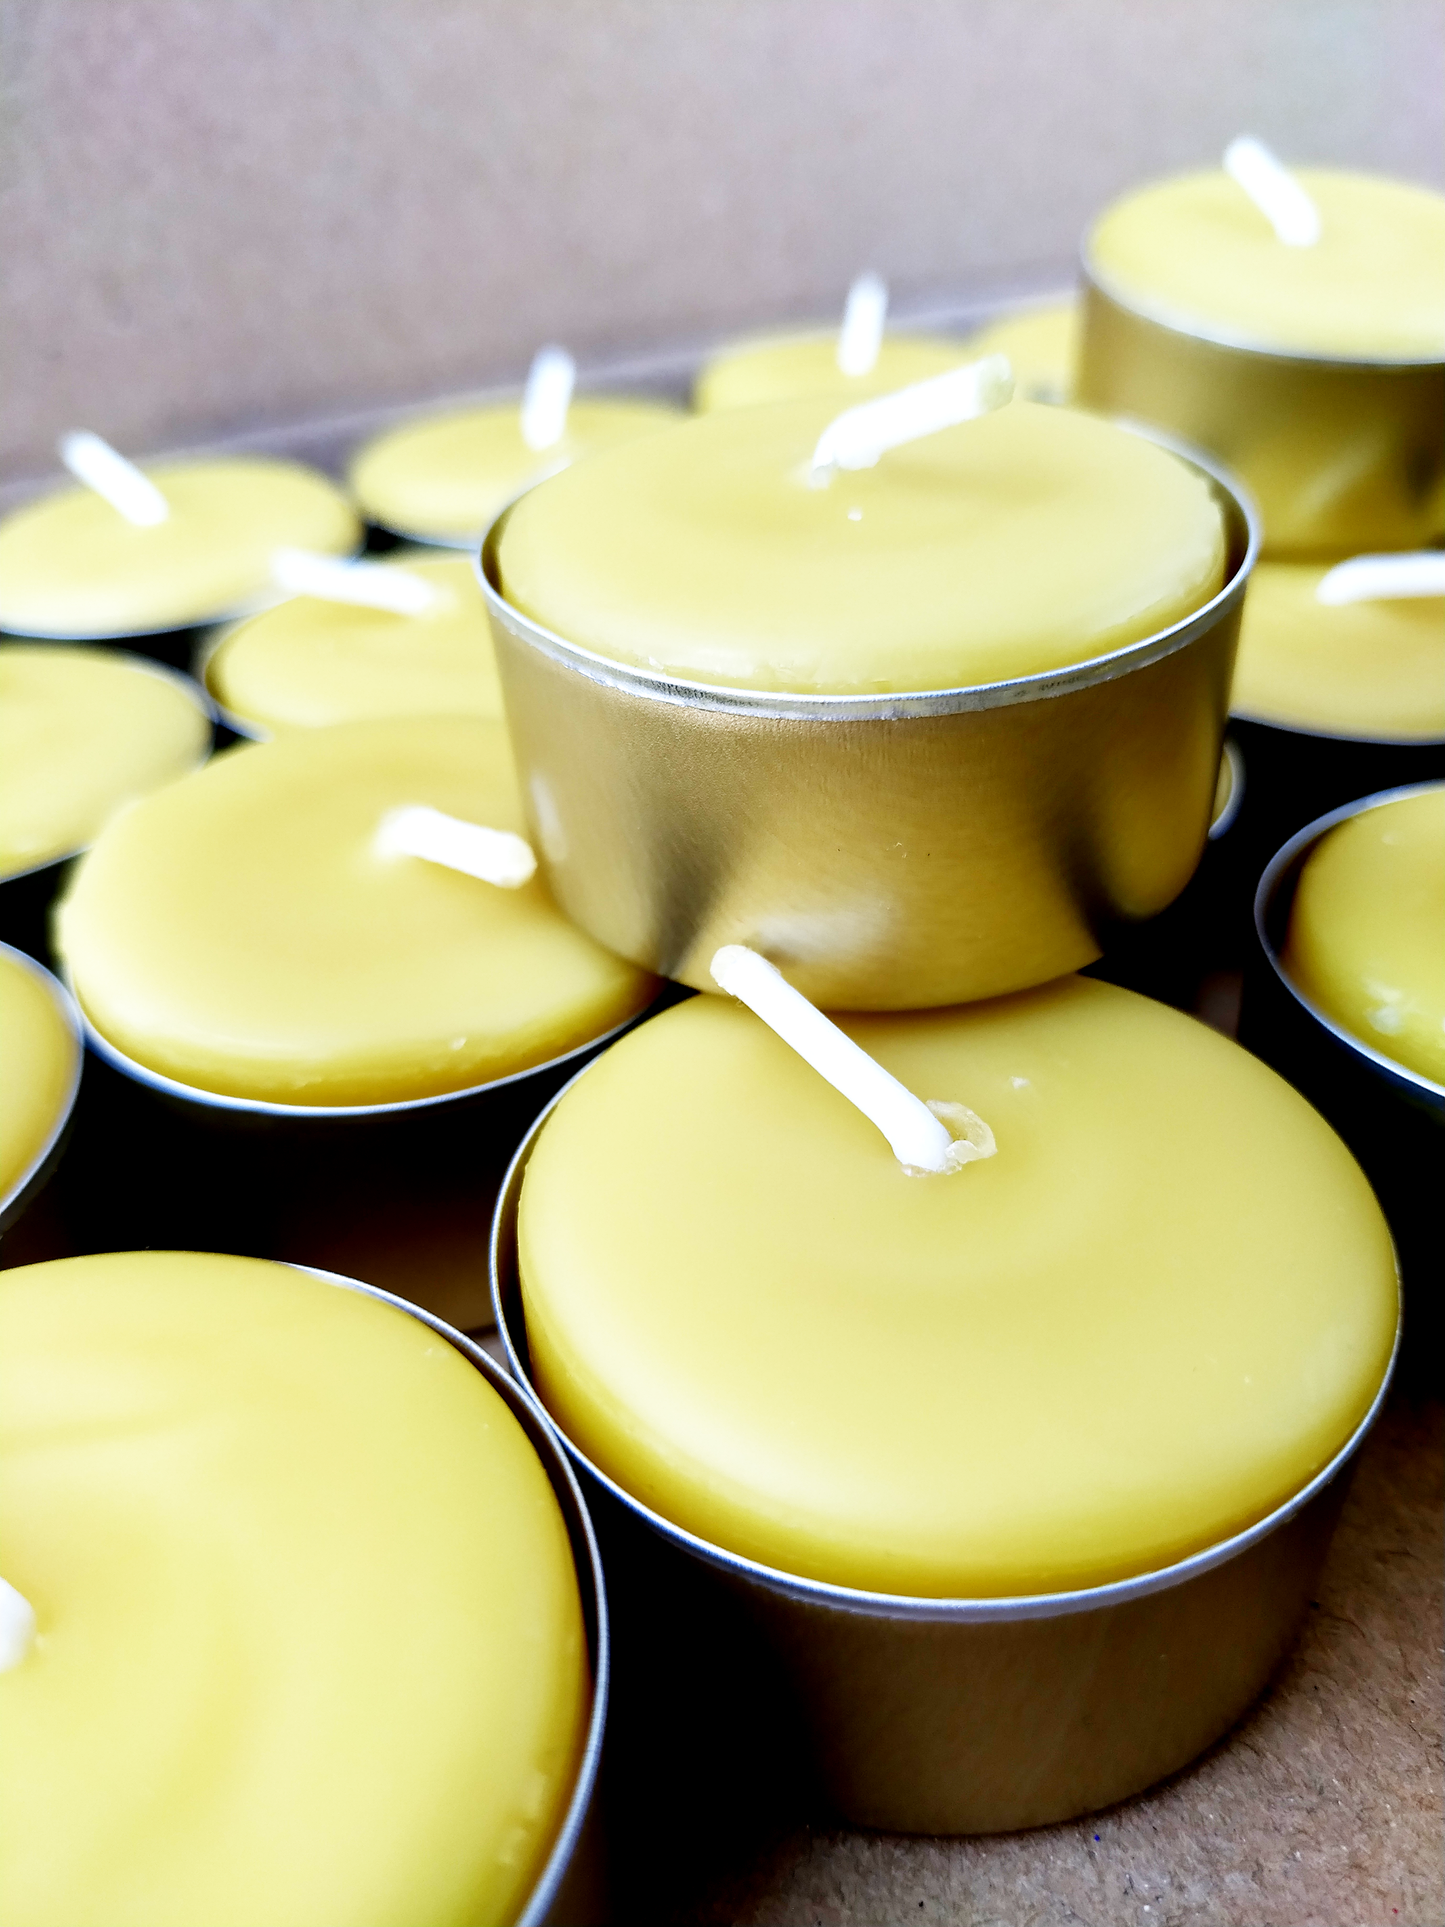 PURE Beeswax tealights, Hand poured, natural tea candles, 100% beeswax-various packs & refills - BEE Zero Waste